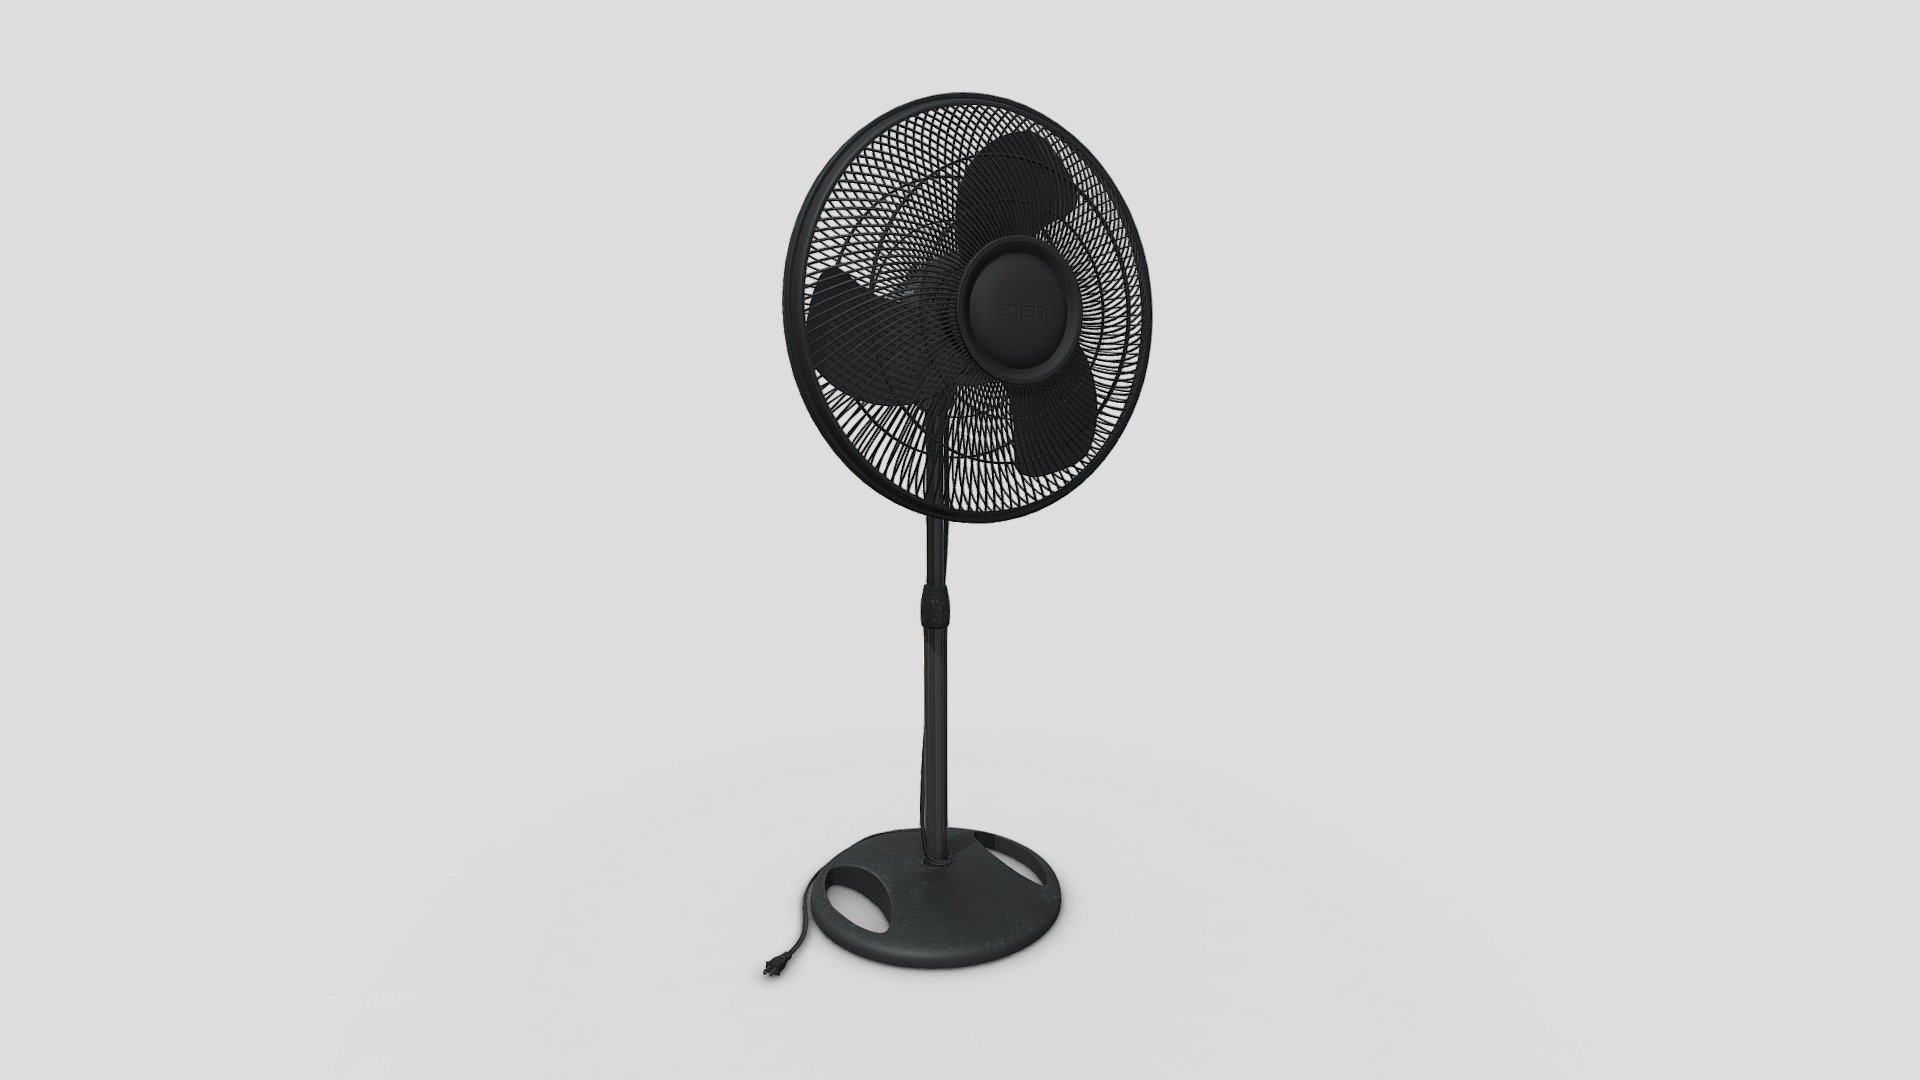 A medium poly dark gray plastic pedestal fan with a simple rig and 4k png textures.




4k png textures with 8 and 16 bit OpenGL normal maps

UE4 ORM and Unity SRP Mask packed textures included

Unity HDRP 2021.1 package included

Verts : 28,916 || Faces : 25,763 || Tris : 53,688

Texel Density : 23.80px/cm :: 4096px - Oscillating Pedestal Fan - Download Free 3D model by HippoStance 3d model